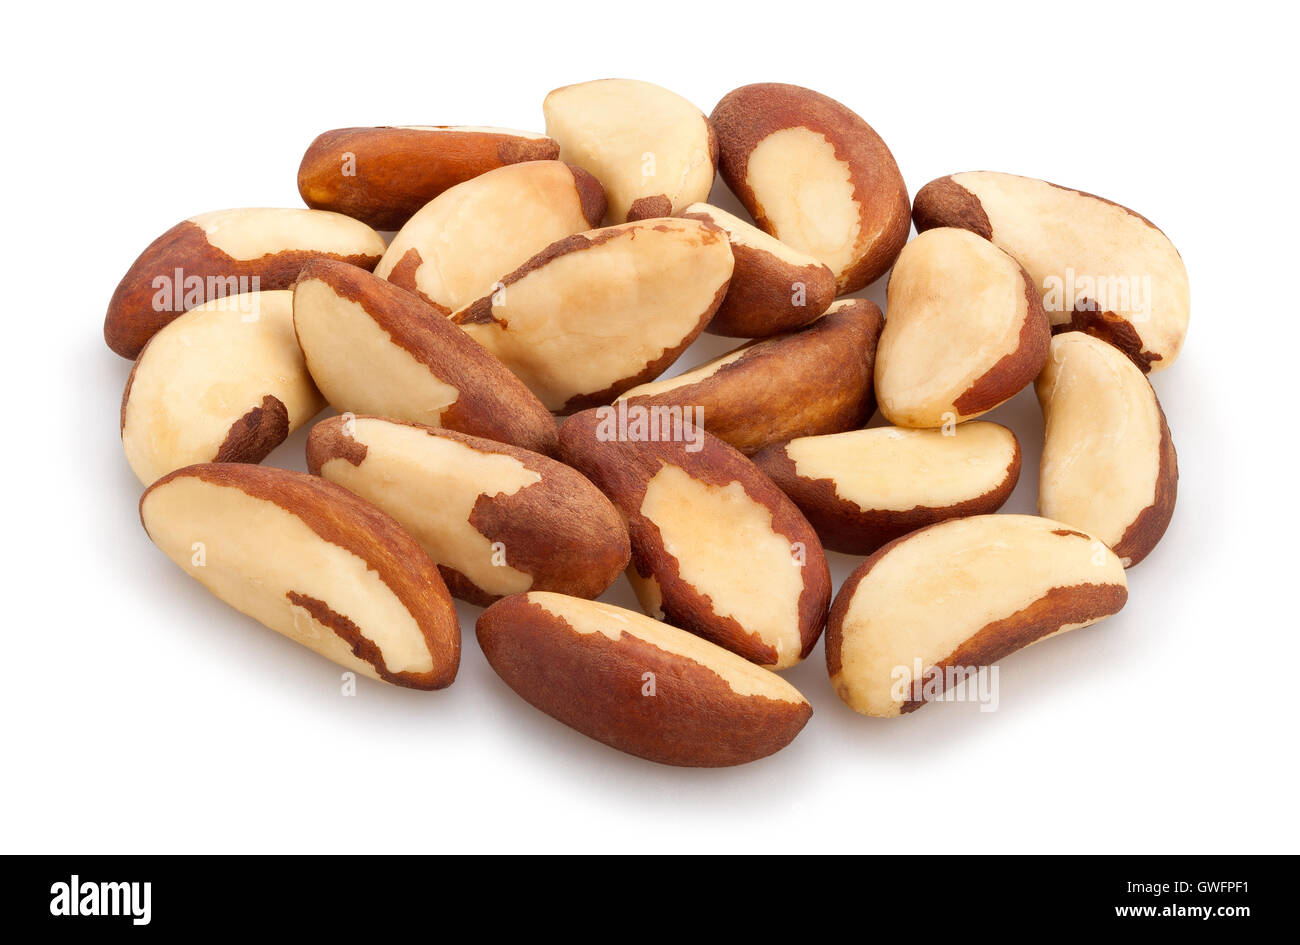 brazil nuts isolated Stock Photo